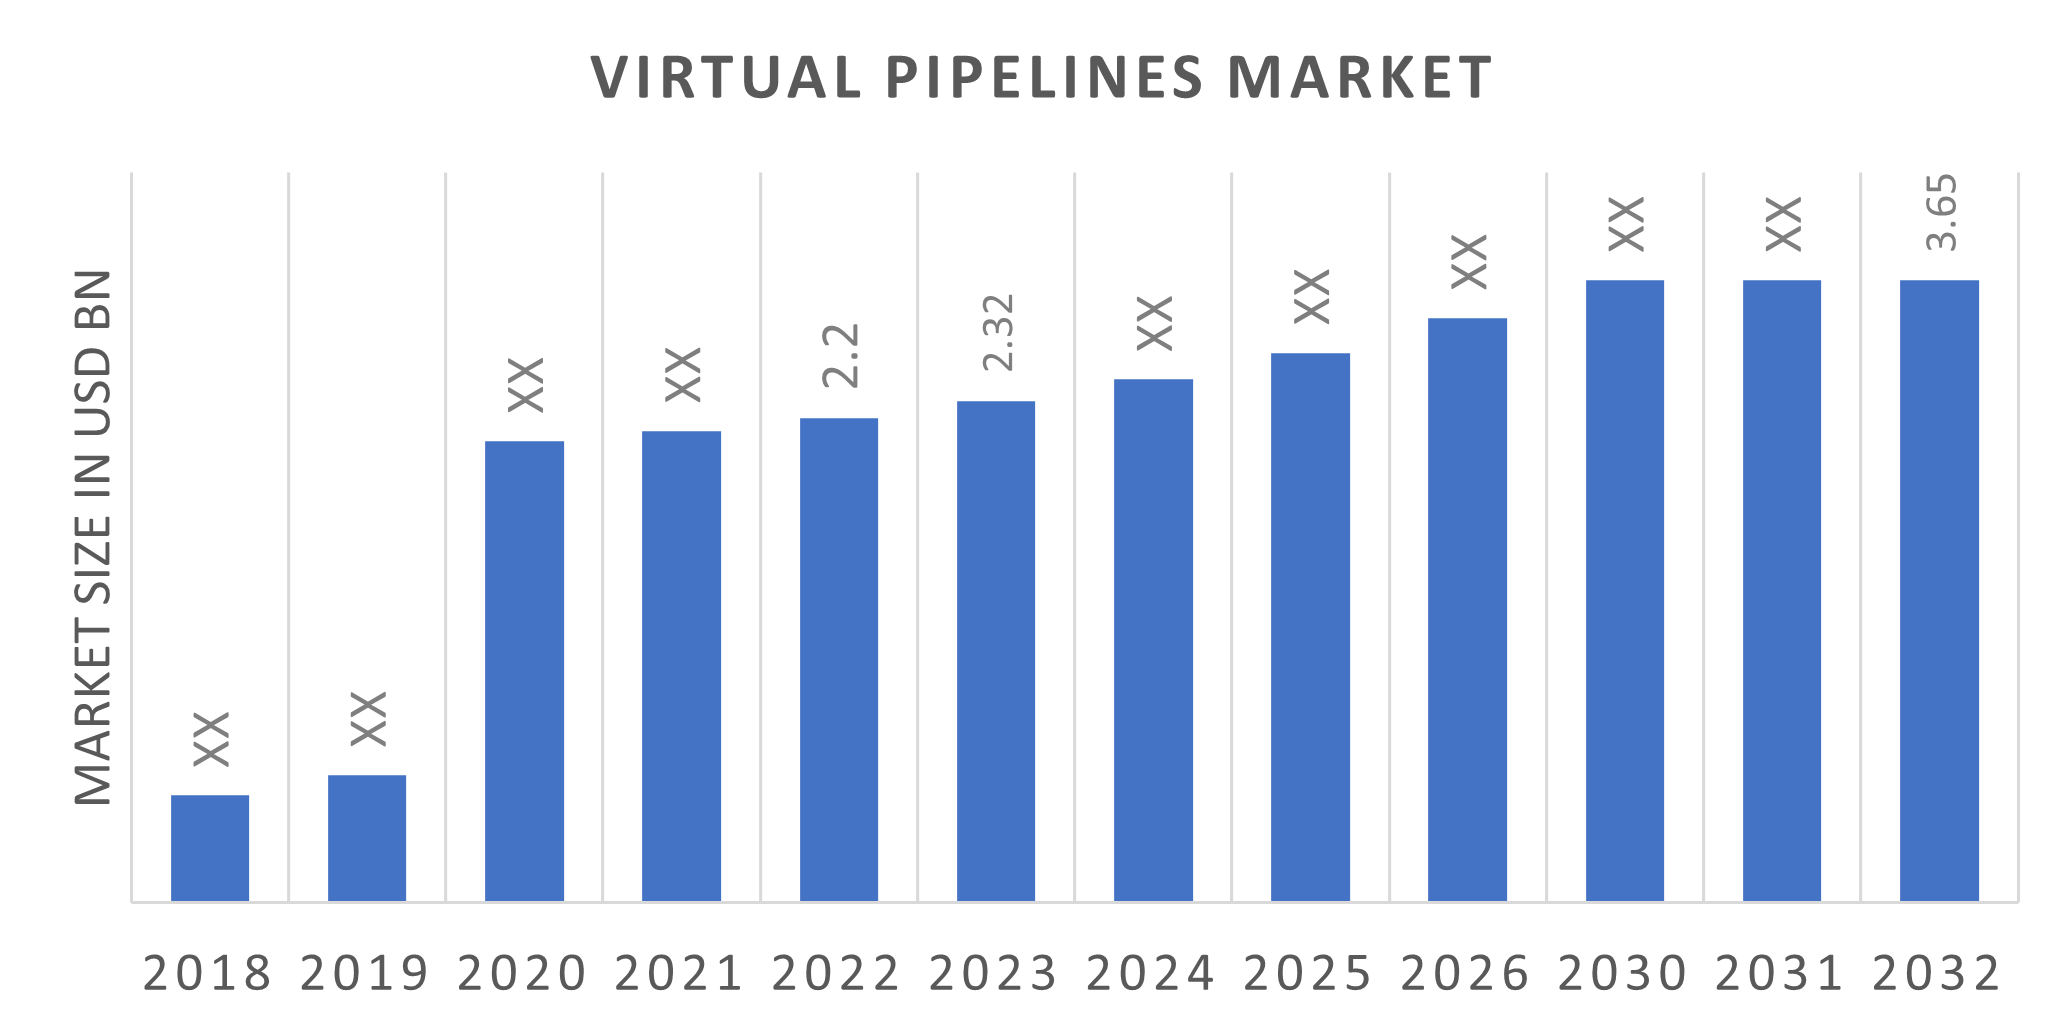 Global Virtual Pipelines Market Overview